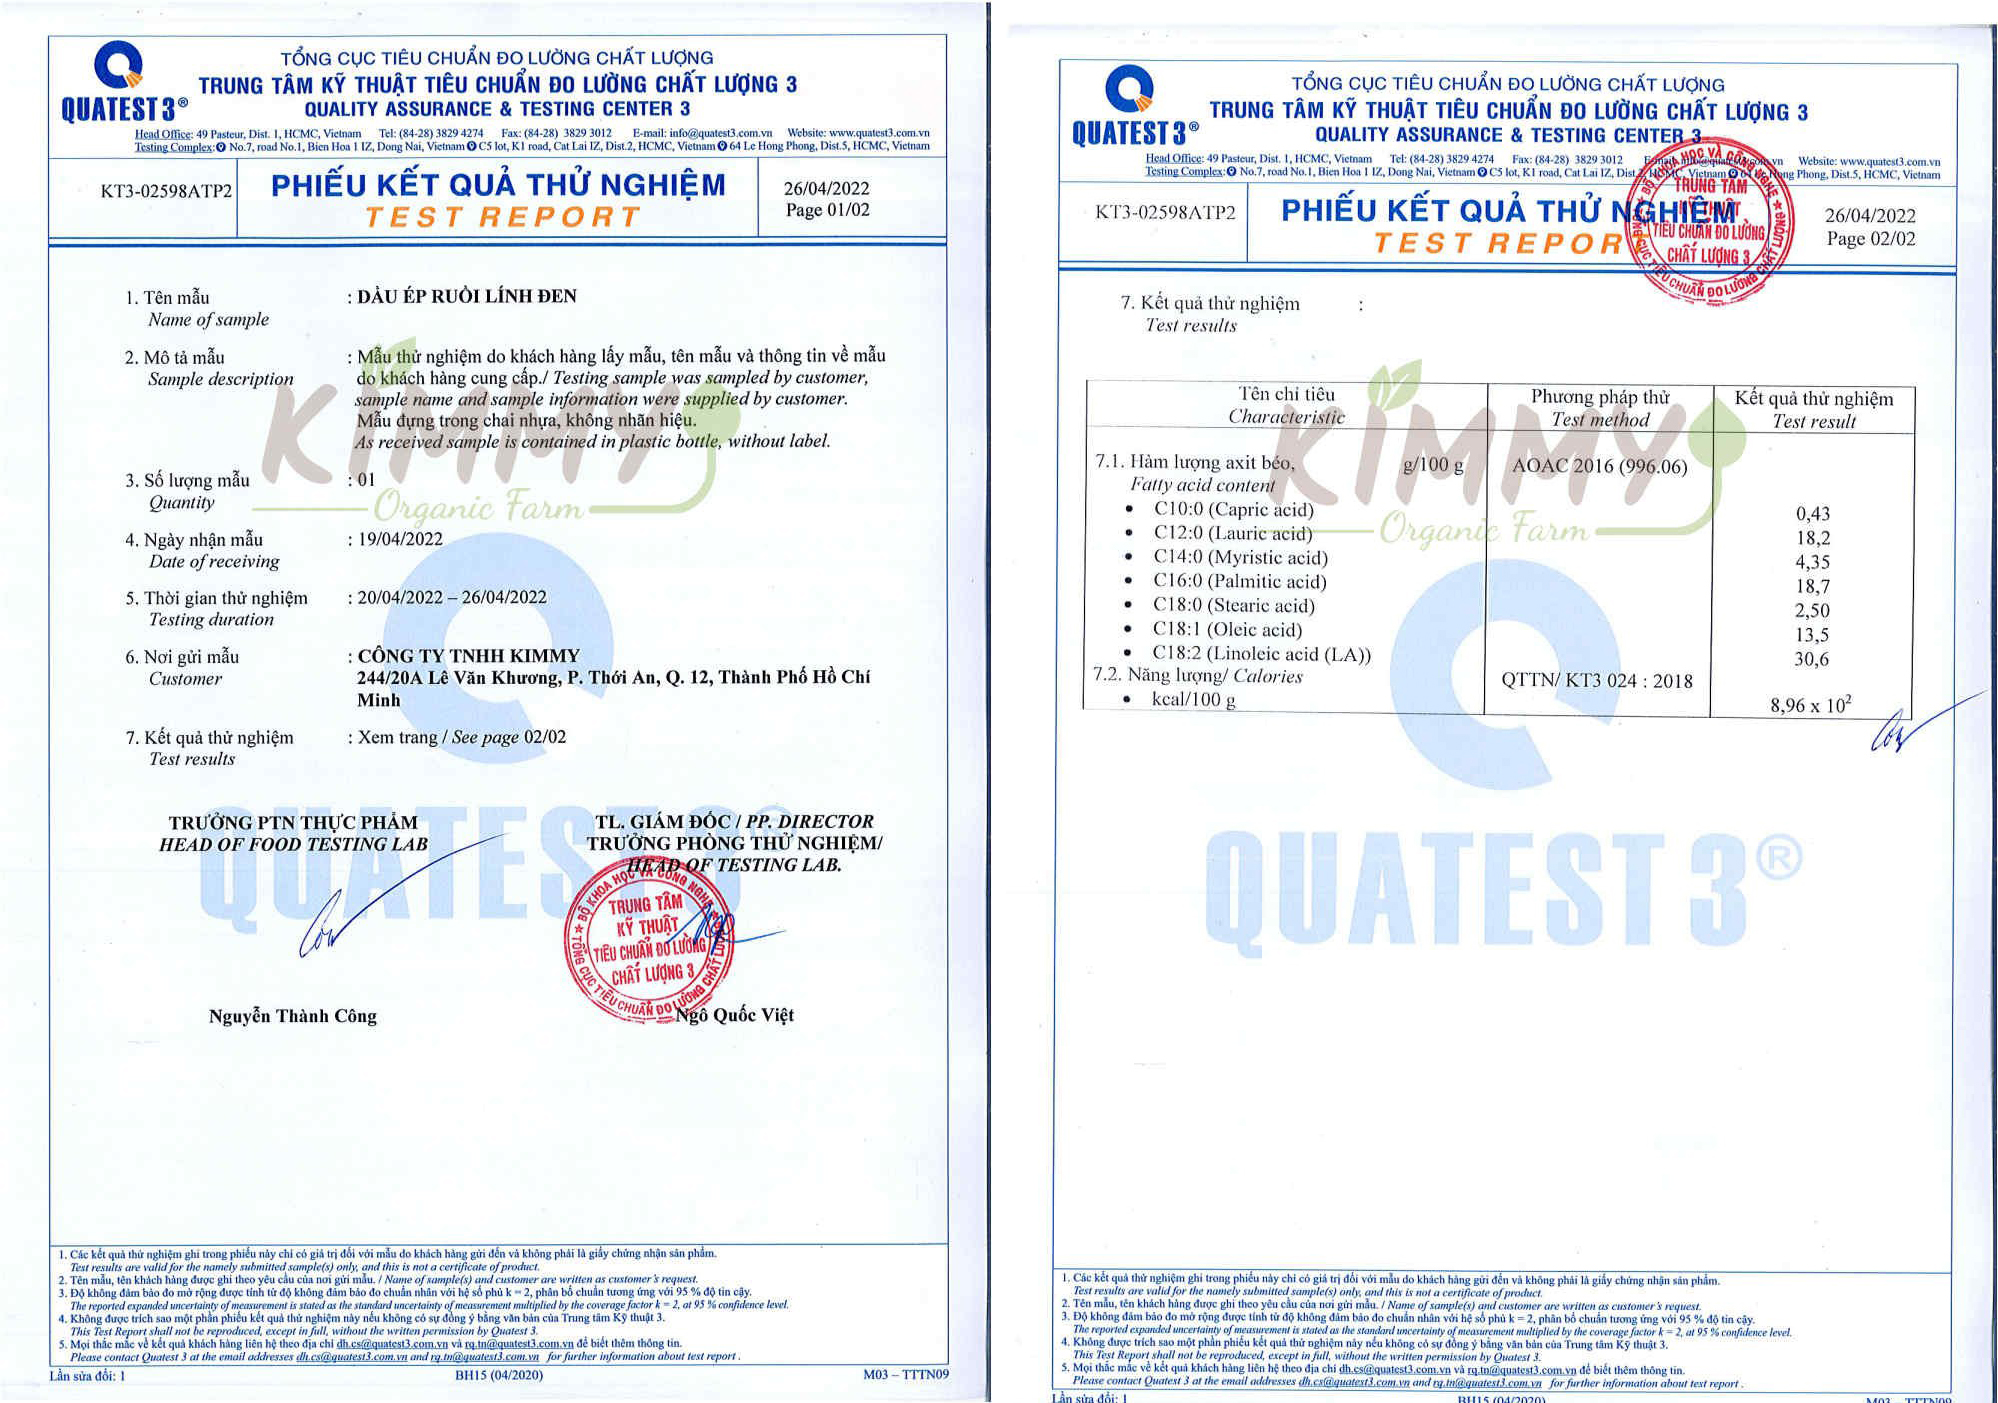 Test Report of Our BSFL Oil Products - Kimmy Farm Vietnam